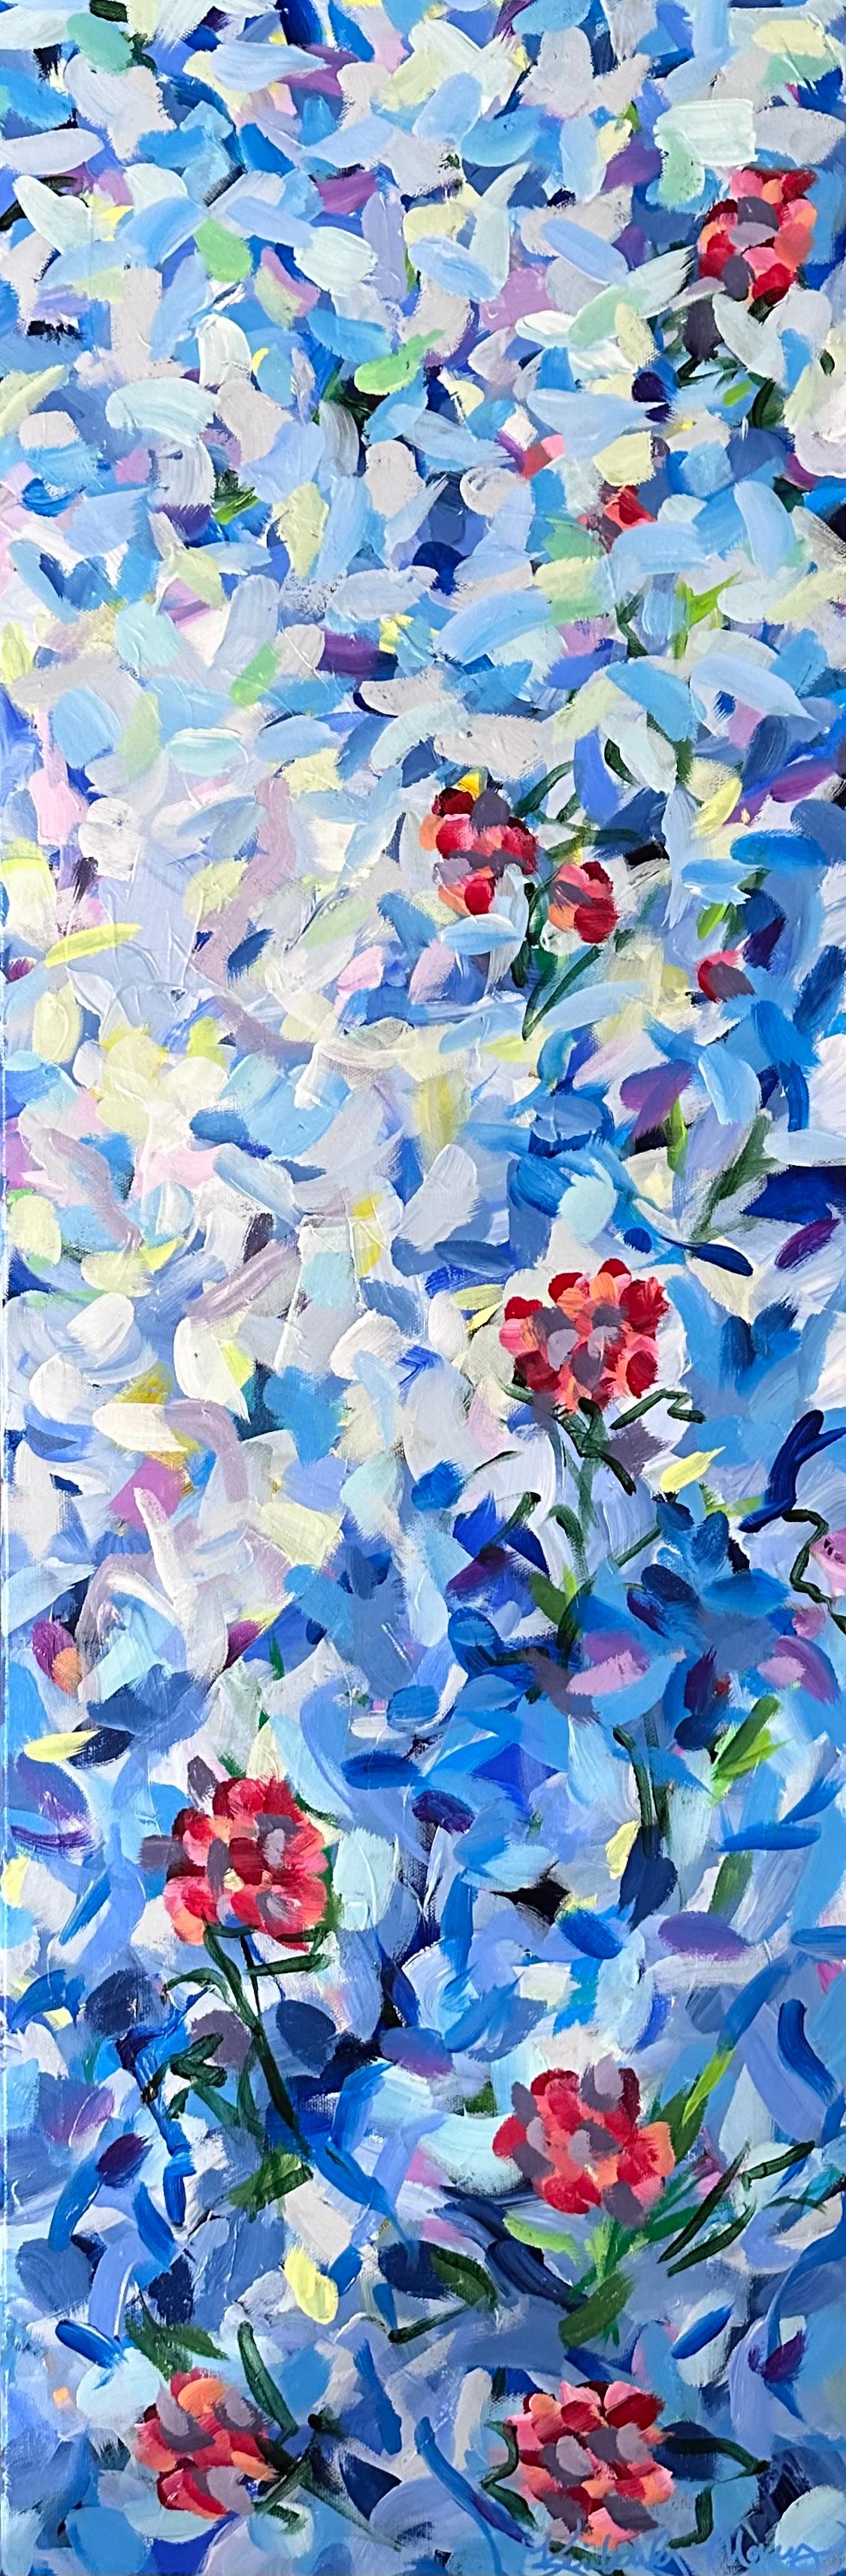 Daybreak (Abstract, Blue, Flowers, Floral, Landscape, Garden, Yellow, Pink) - Painting by Kimberly Marney